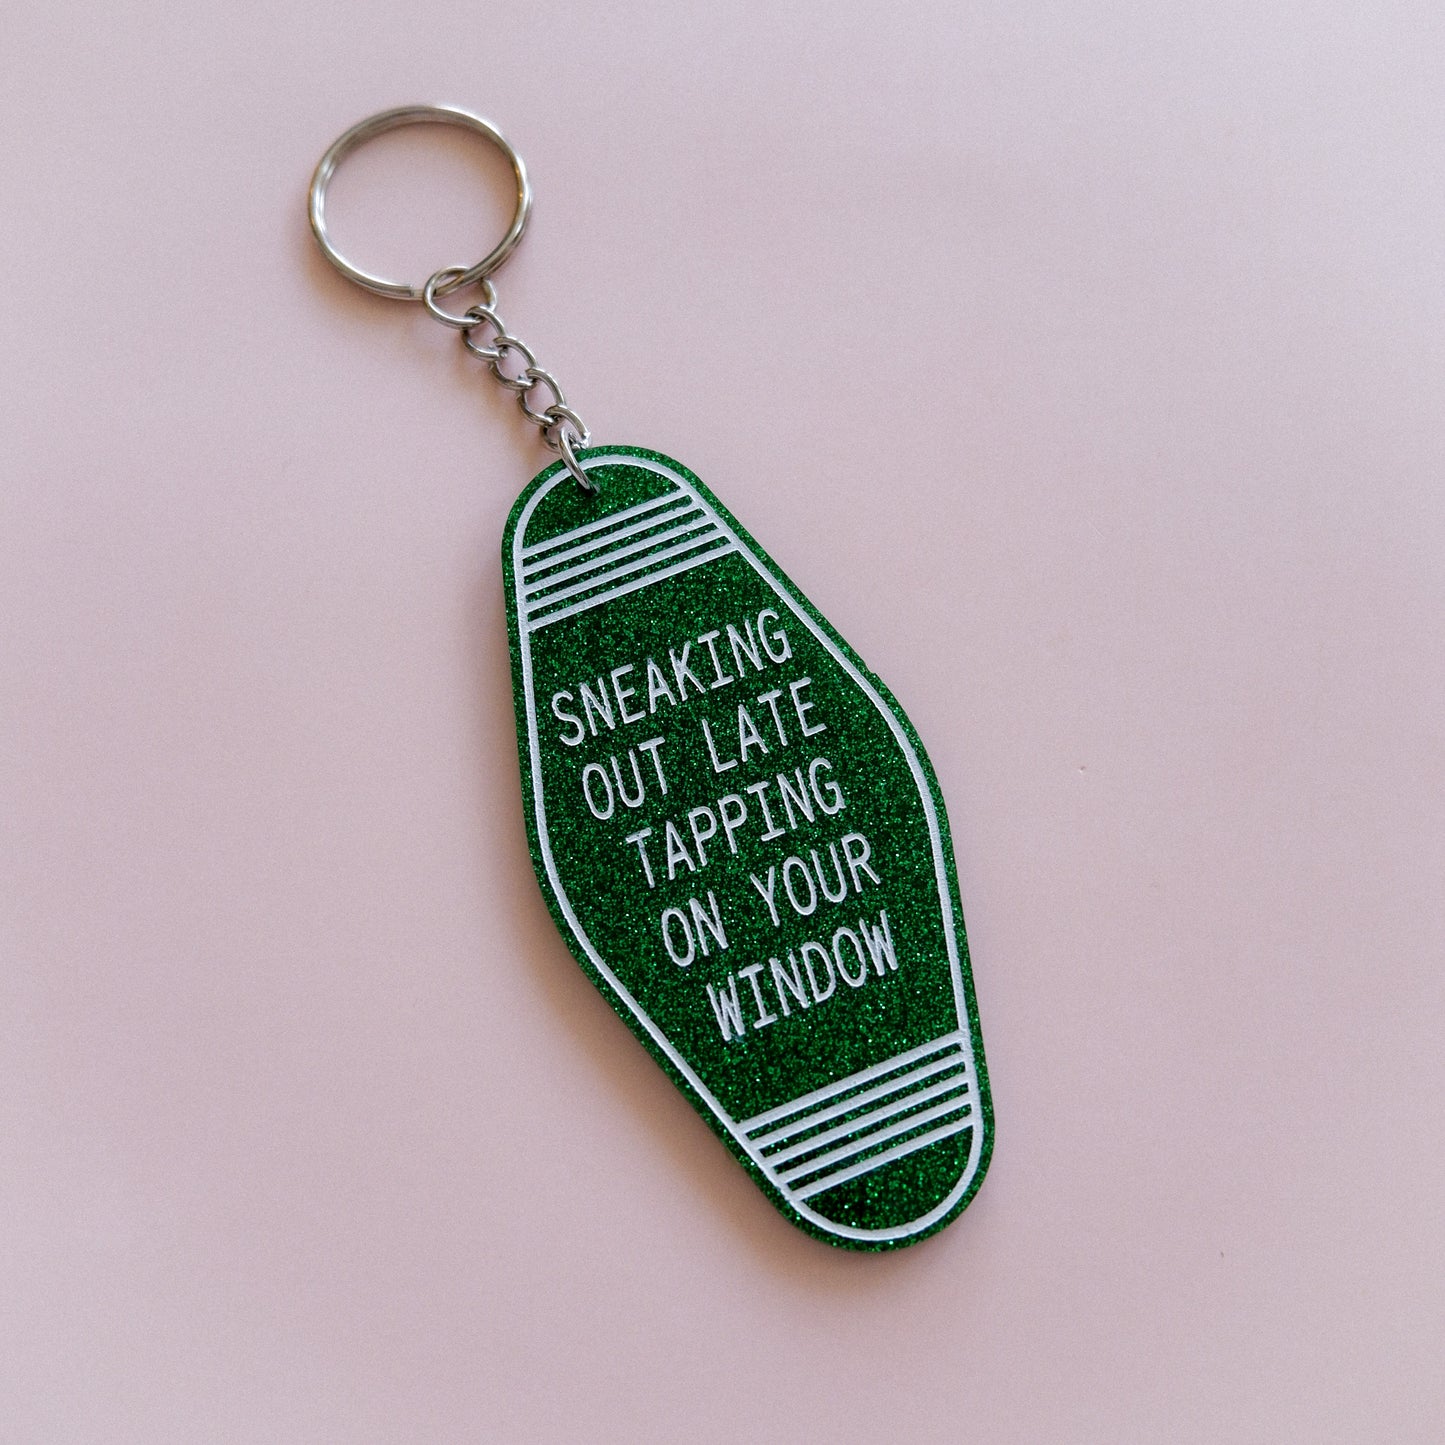 our song is the... keychain